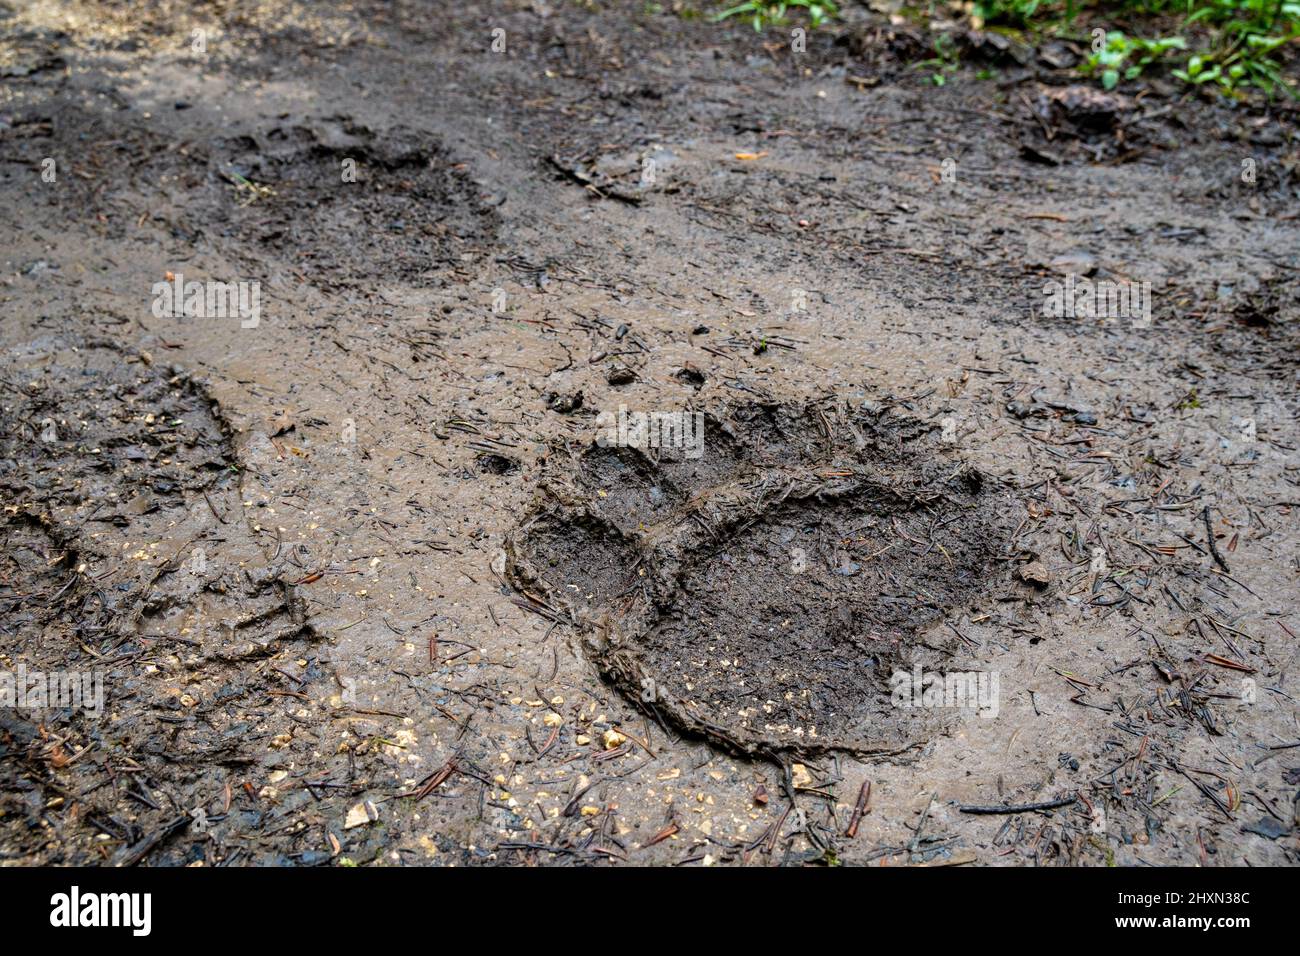 Footprint of large bear found in the mountains. Stock Photo